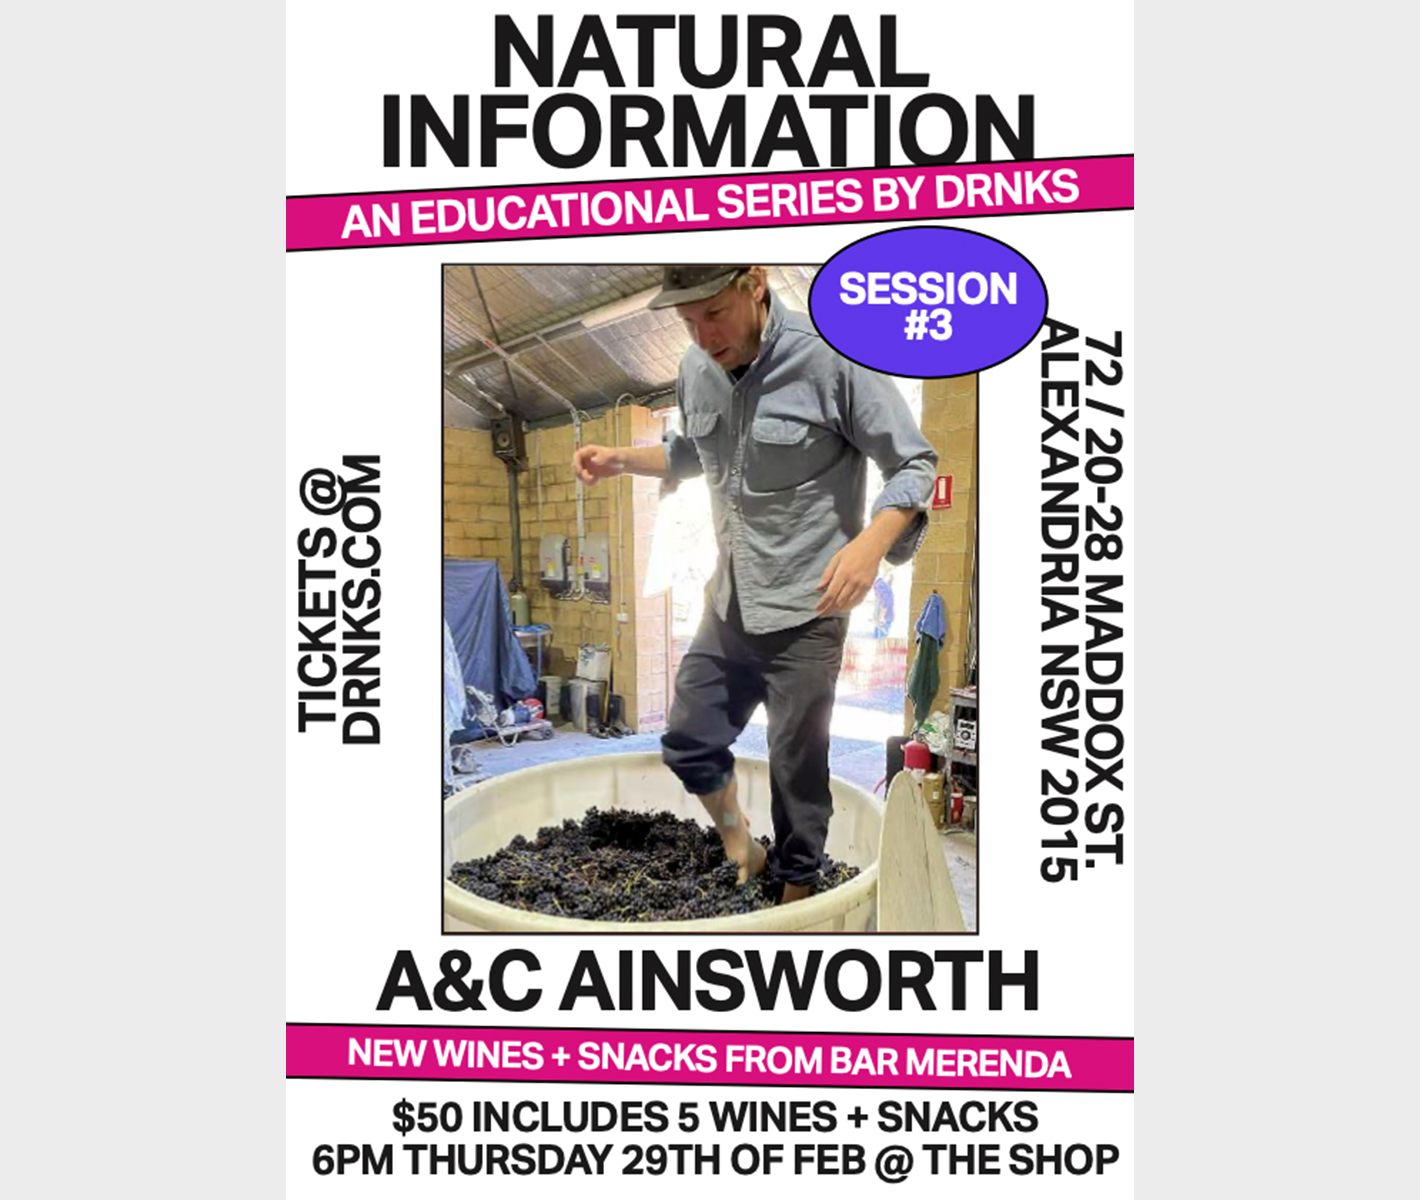 Natural Information Session #3 - A & C Ainsworth